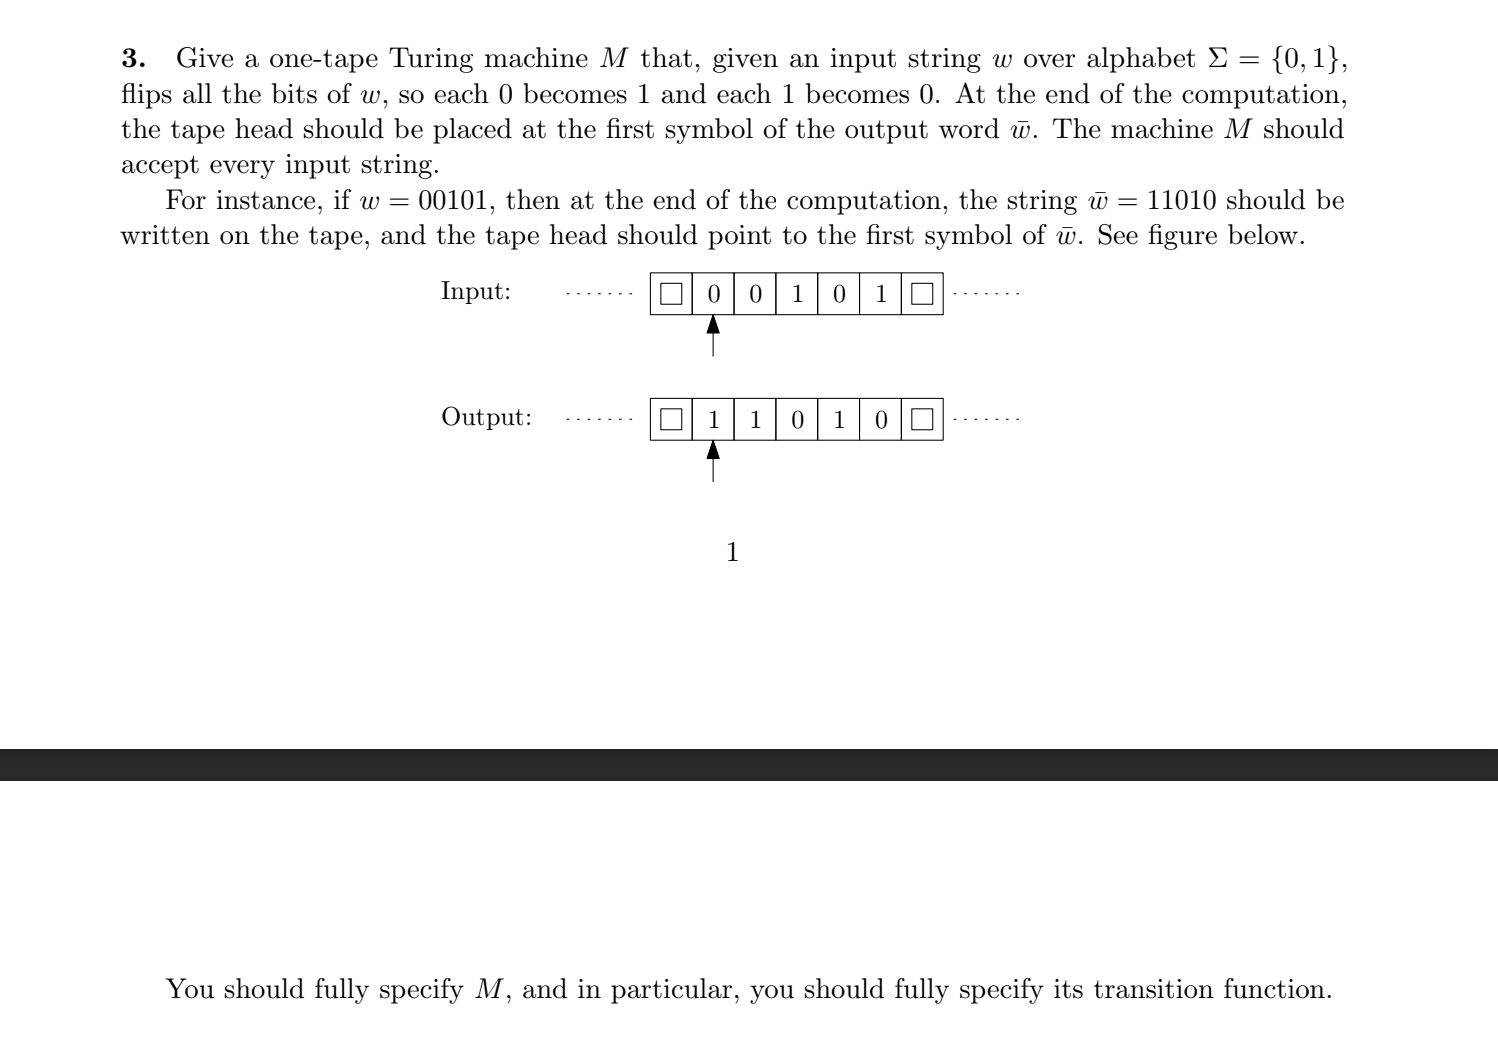 3. Give a one-tape Turing machine M that, given an input string w over alphabet  = {0, 1}, flips all the bits